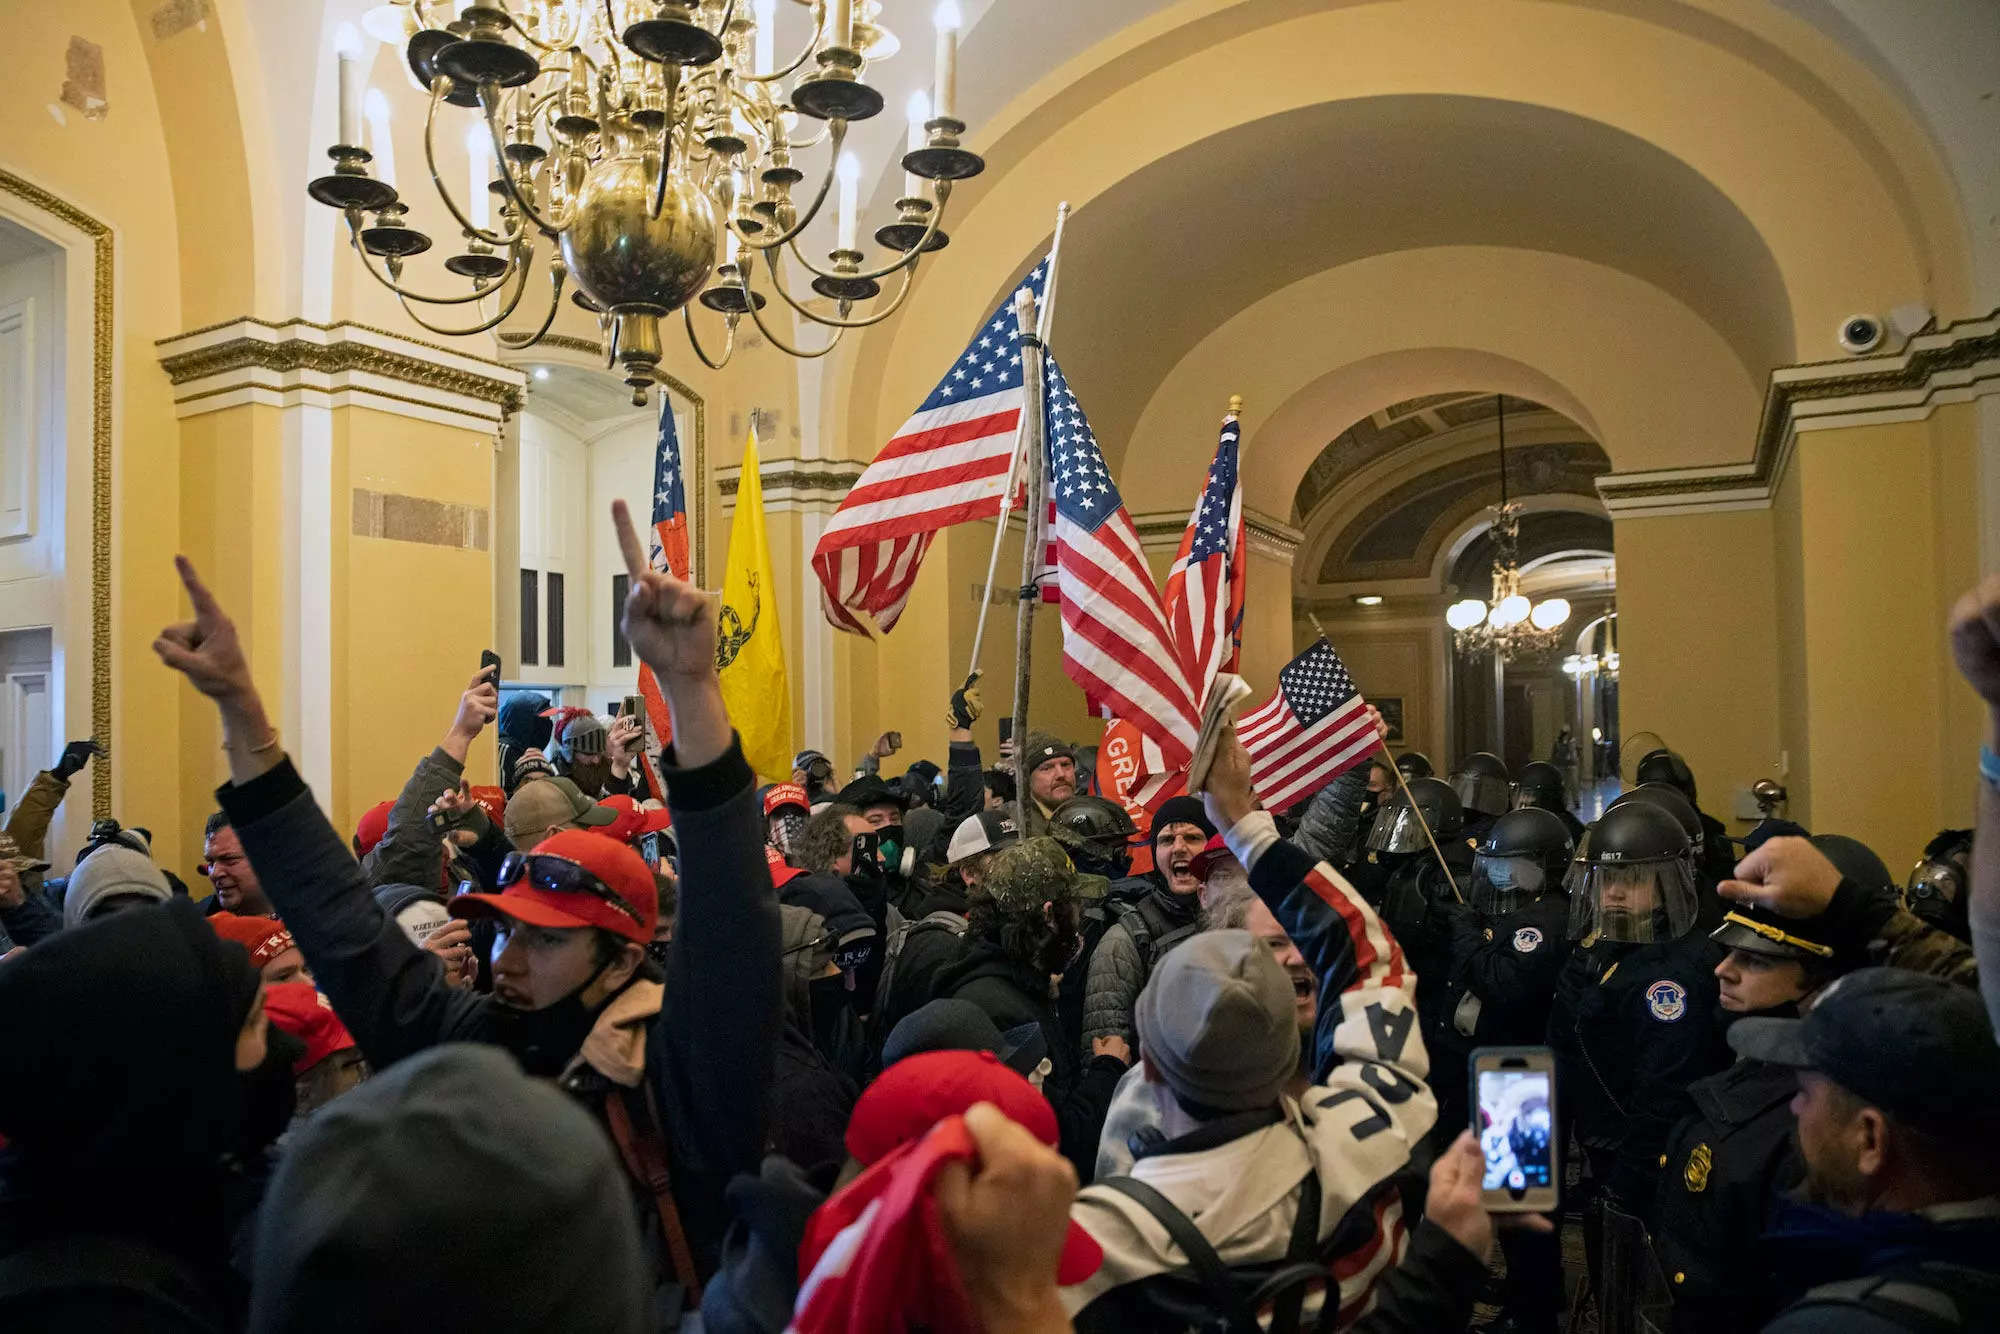 Rioters inside the US Capitol on January 6, 2021.